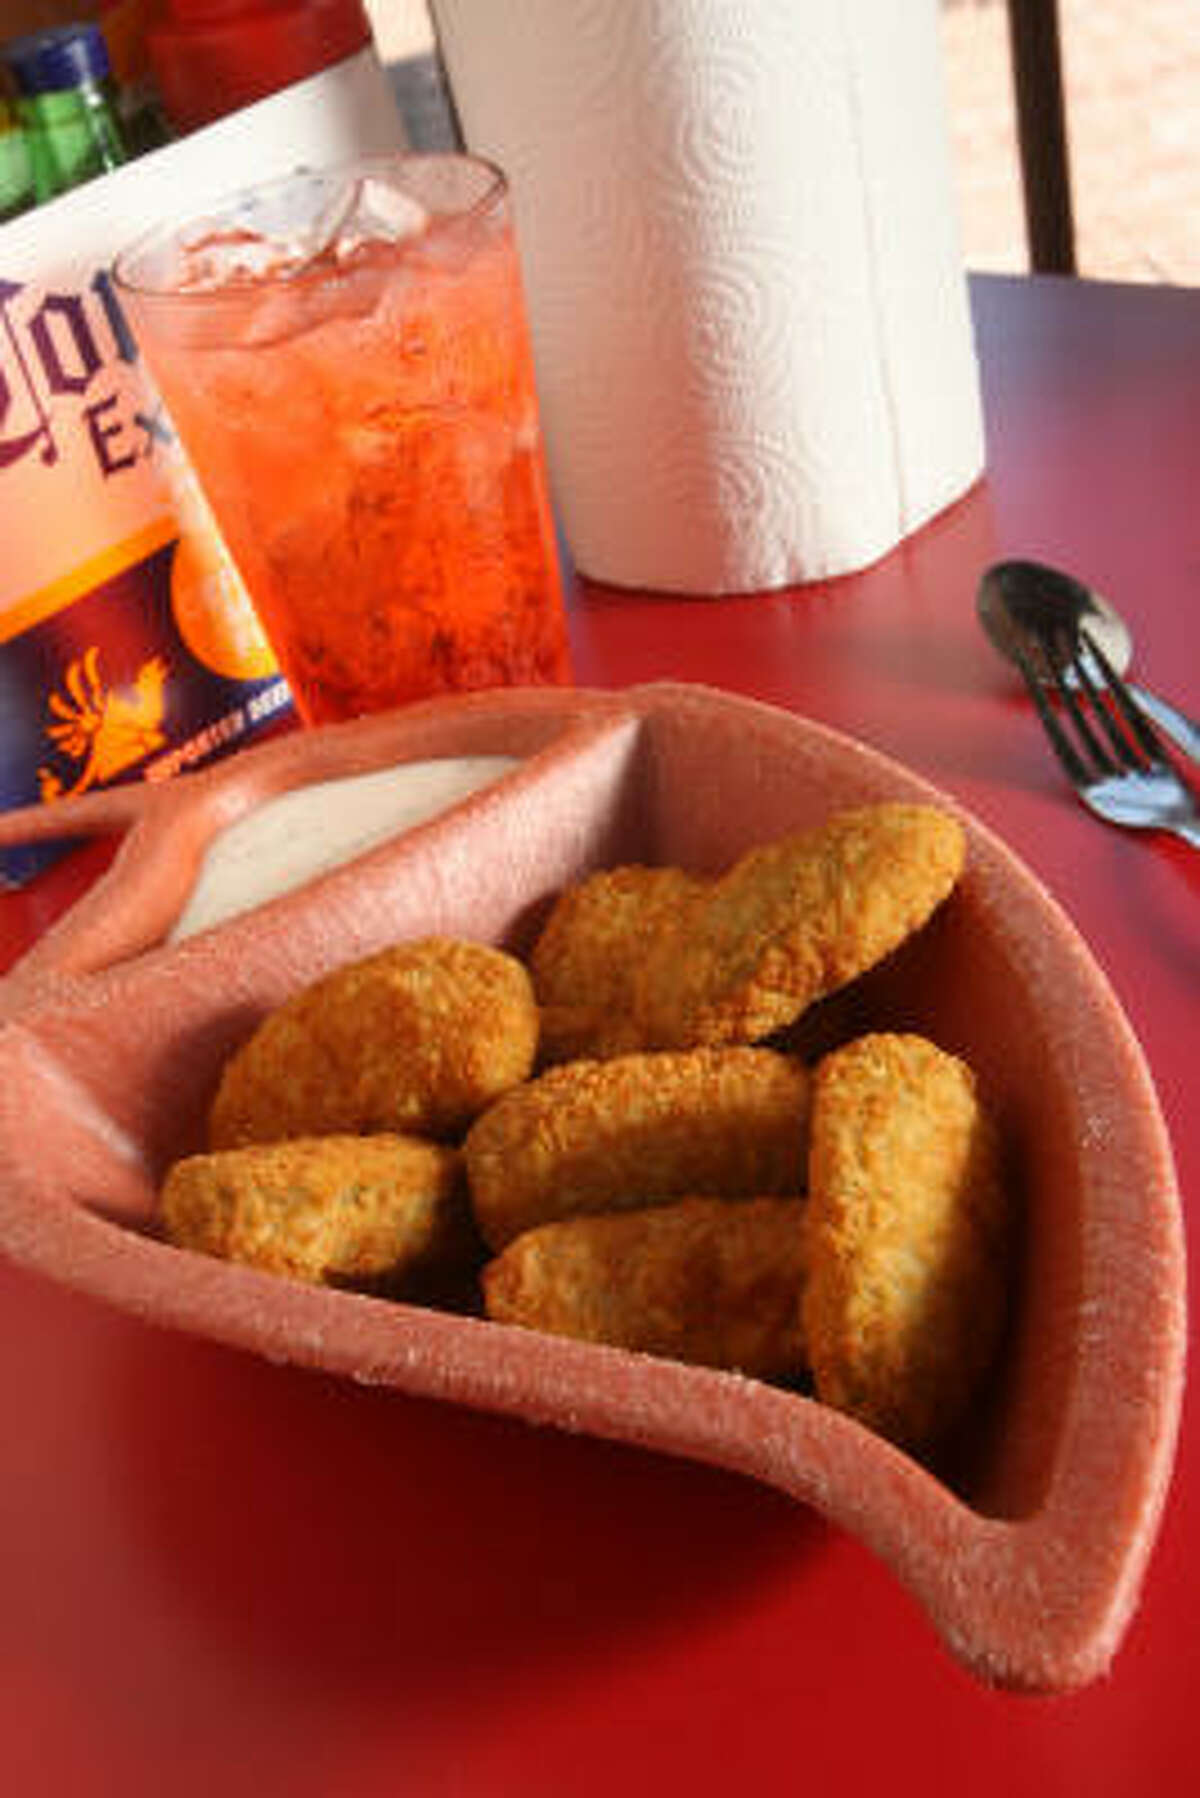 Jalapeno poppers and a cherry limeade.